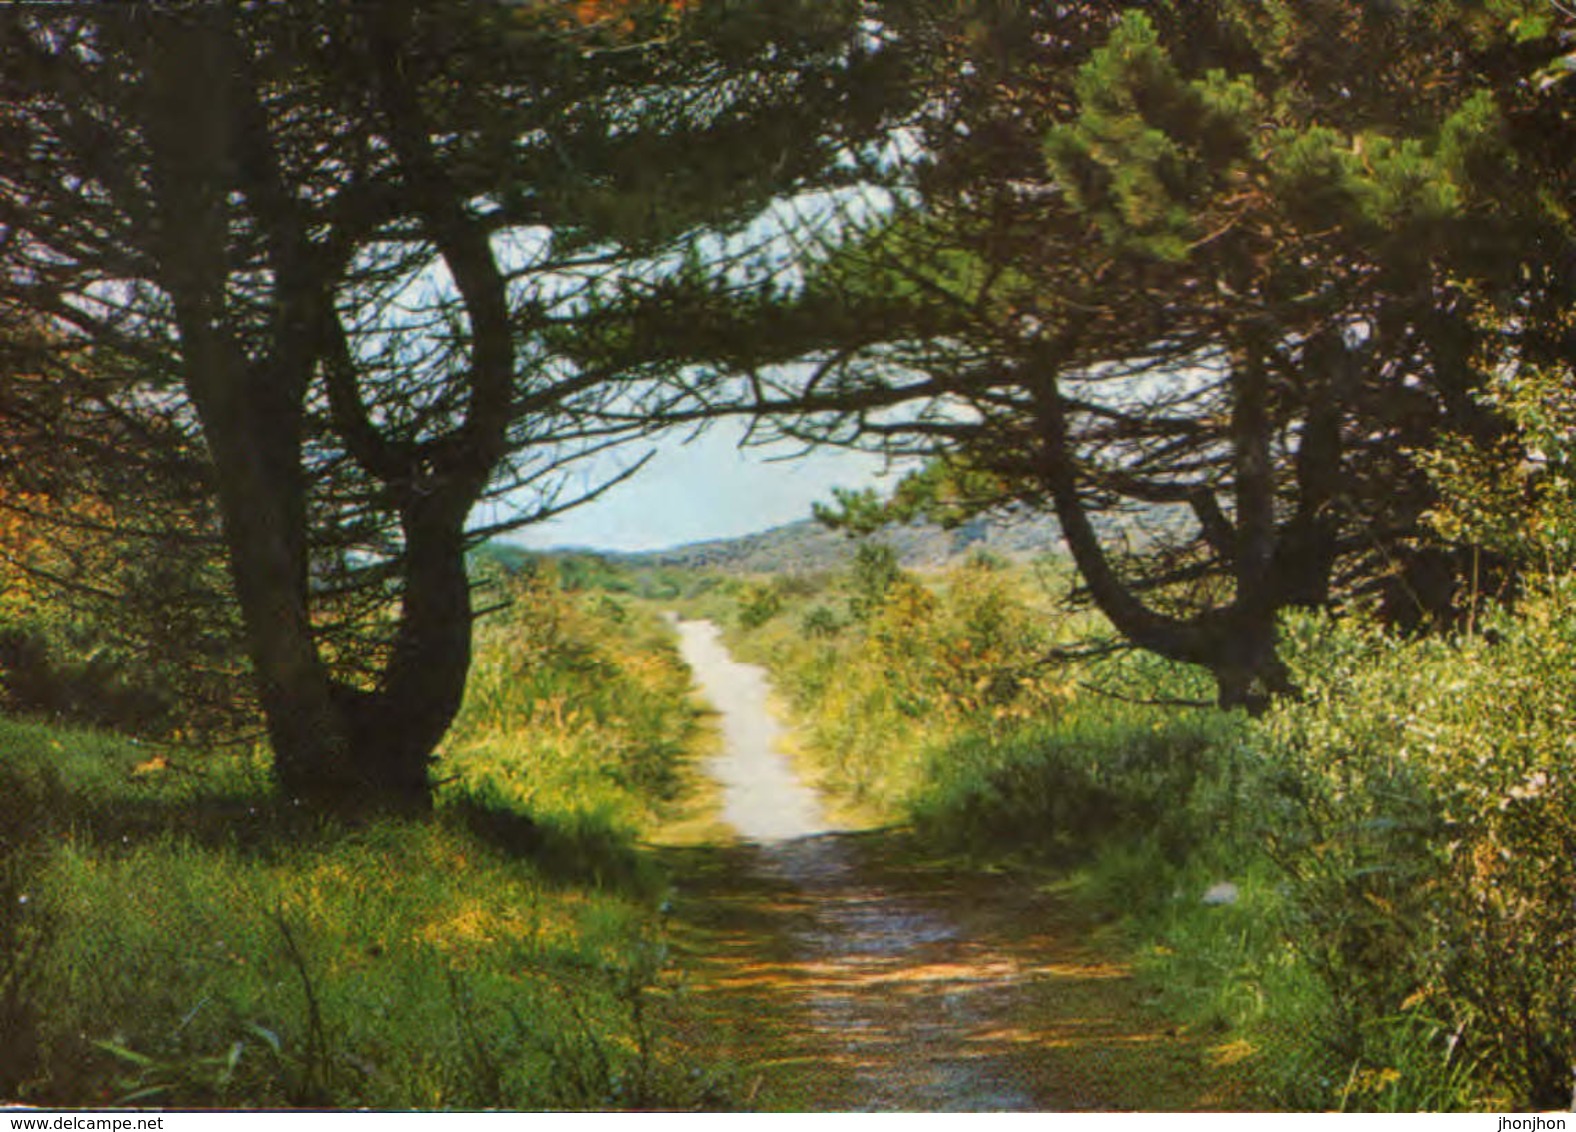 Nederland - Postcard Circulated In 1975  - Greetings From The Island Of Ameland   - 2/scans - Ameland